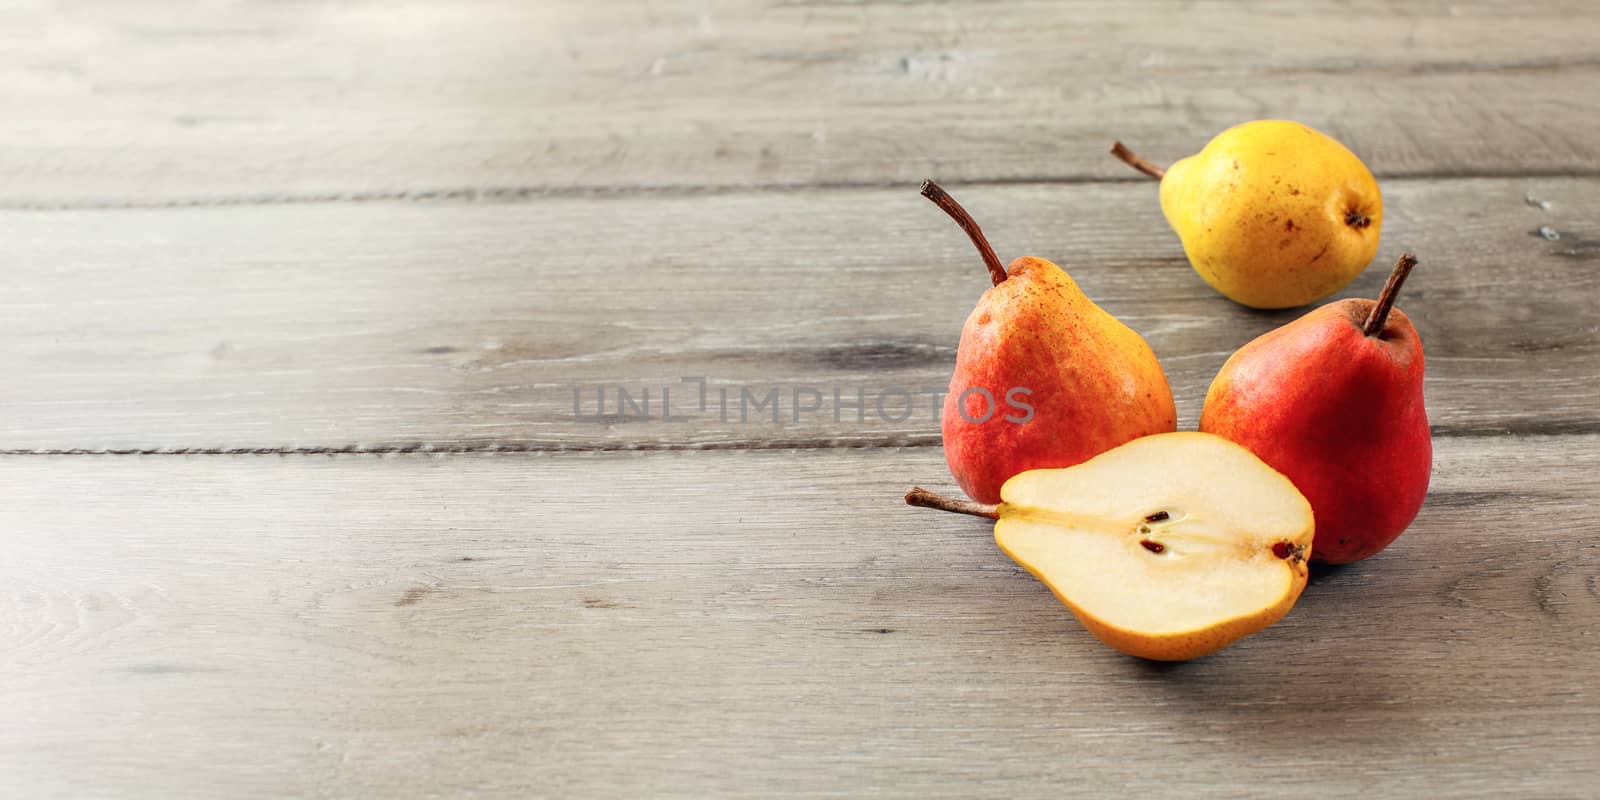 Top view of ripe pears, one of them cut in half, on gray wooden table.